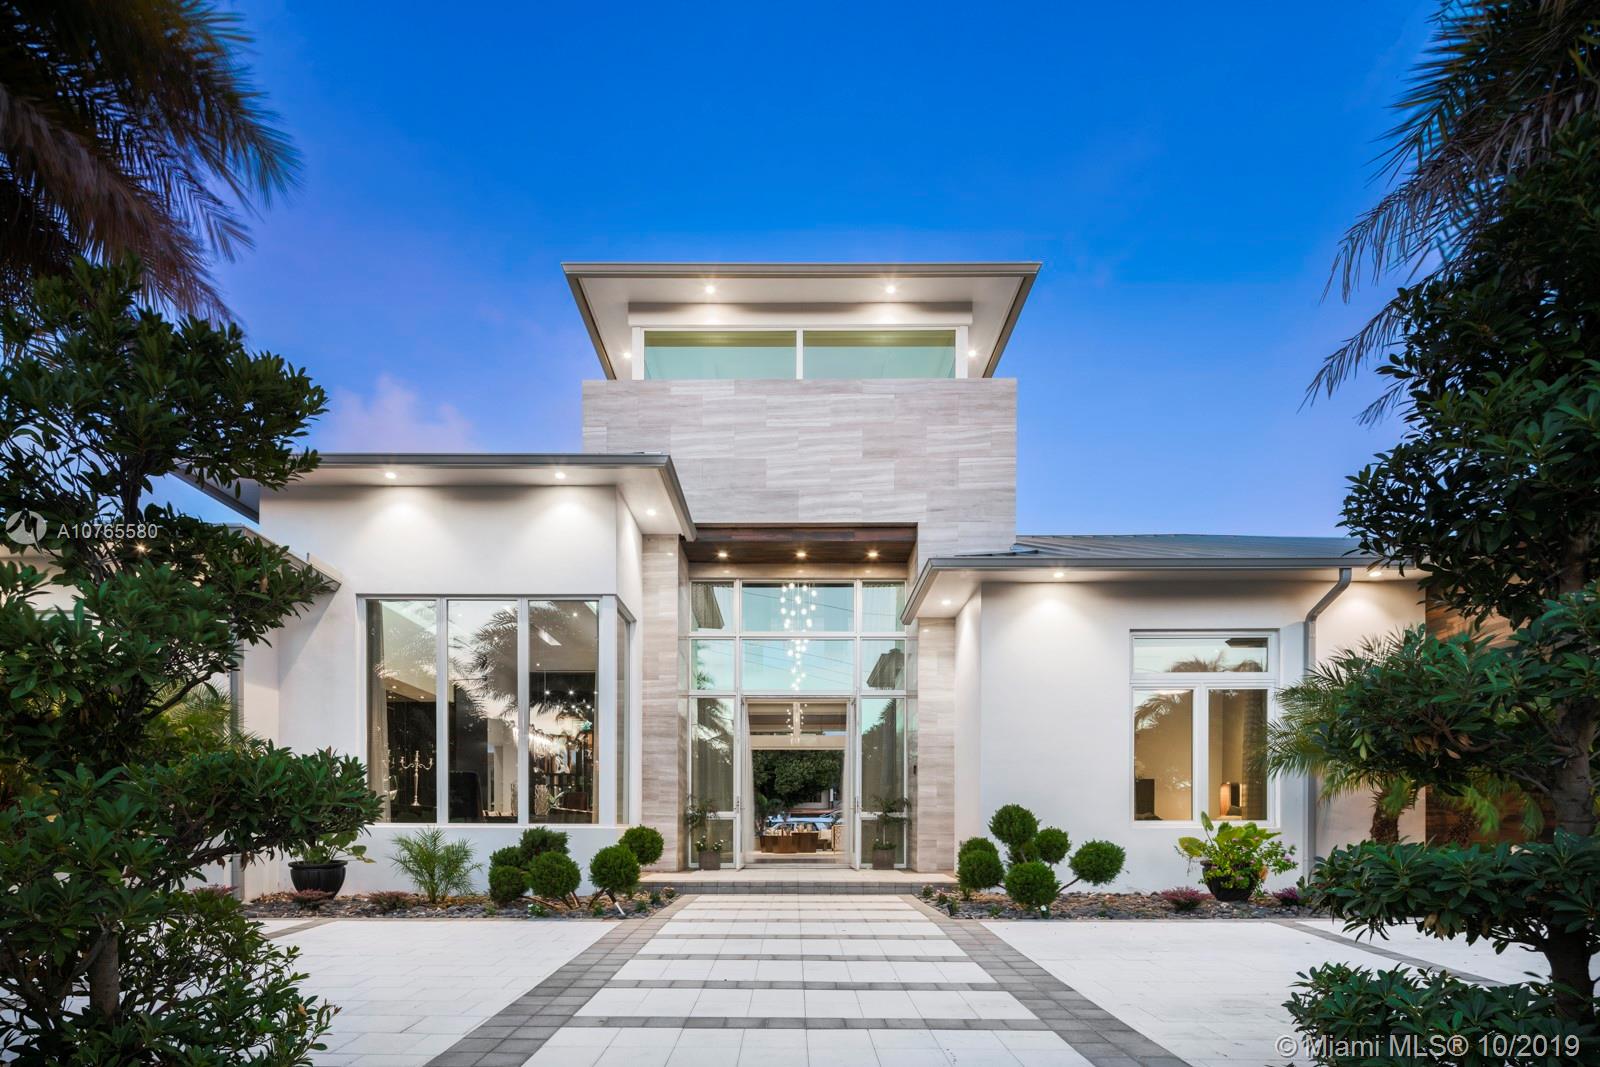 Miami Luxury Homes For Sale Between 2 And 7 Million Dollars